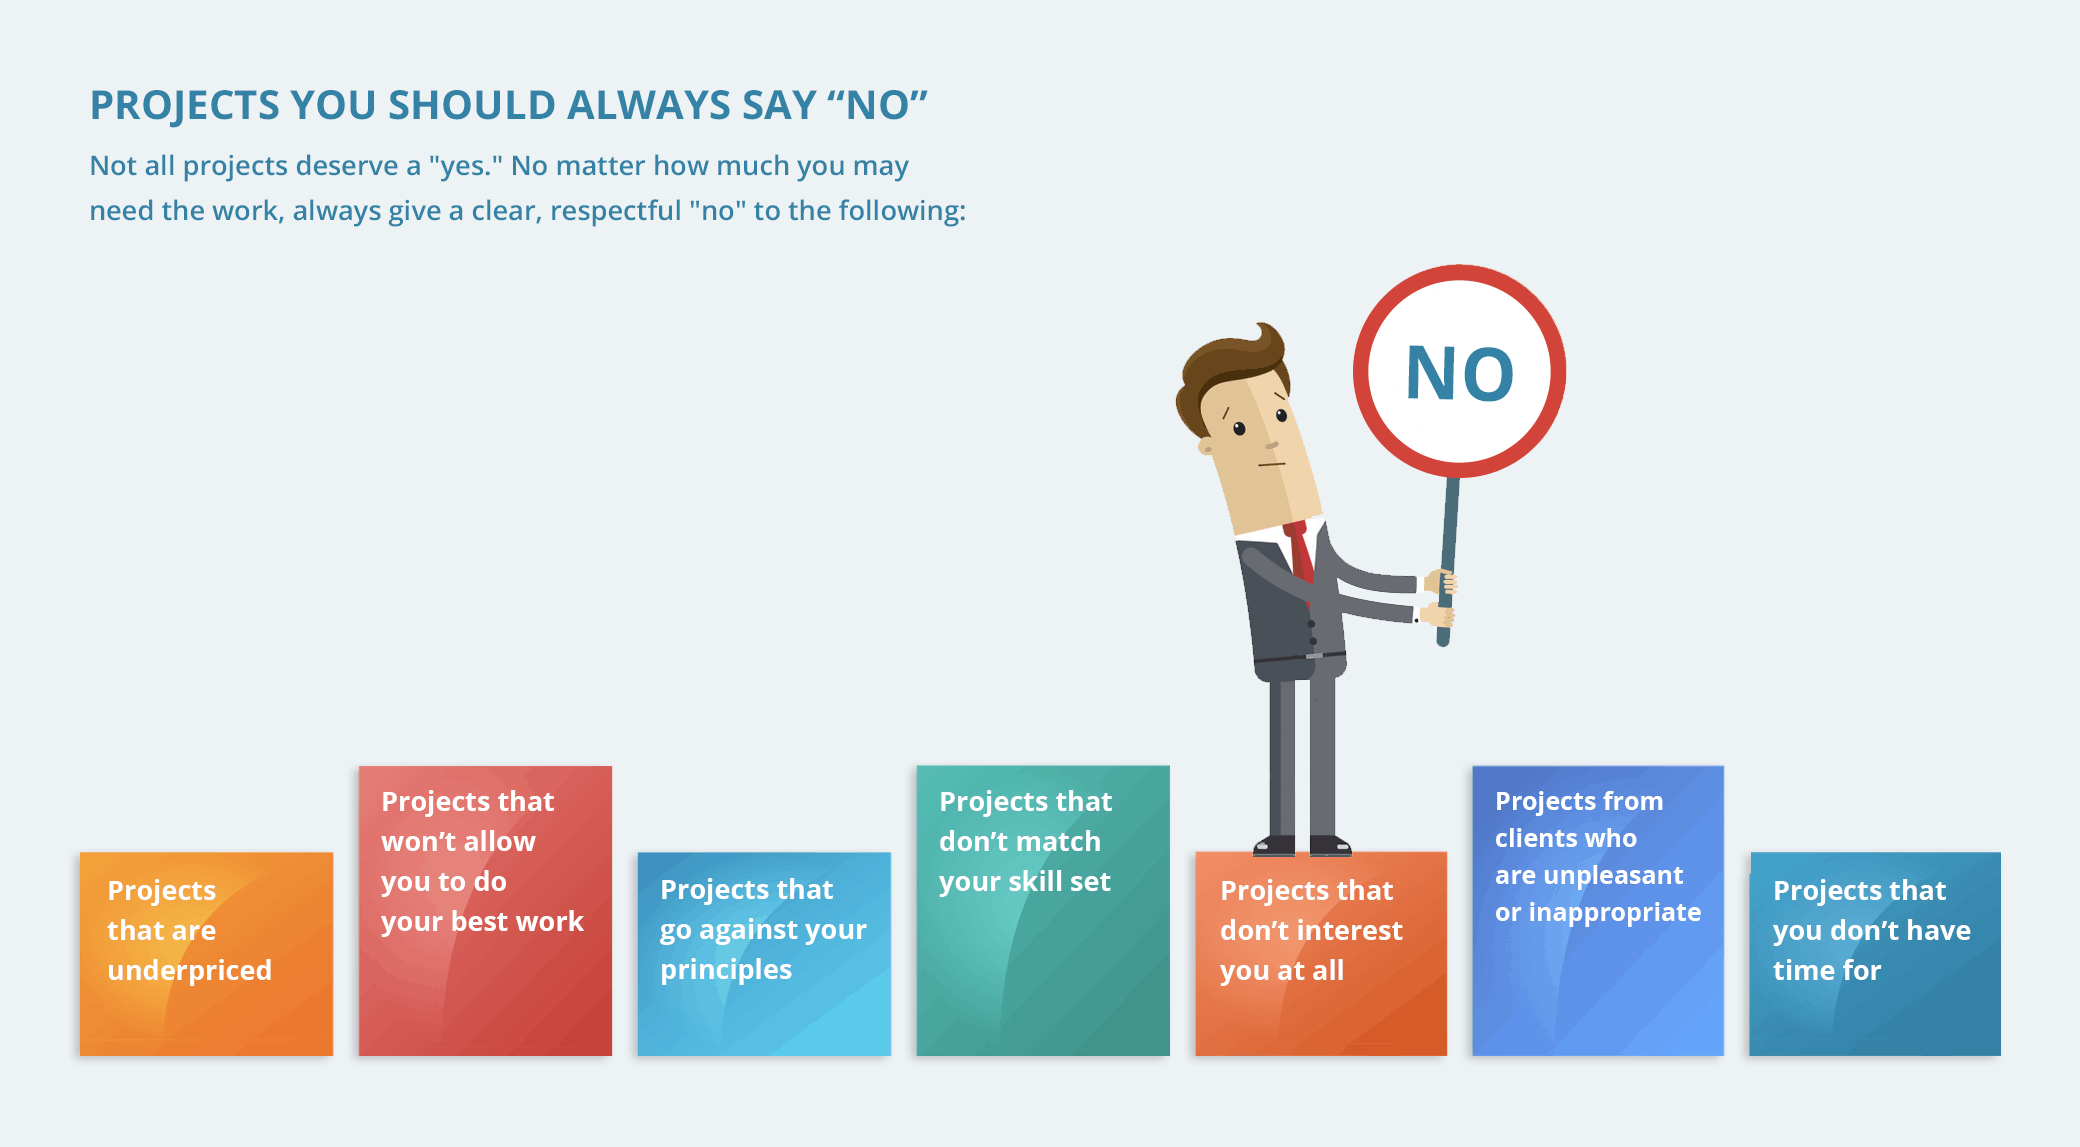 How to Find the Right Job - and How to Say “No” to the Wrong One